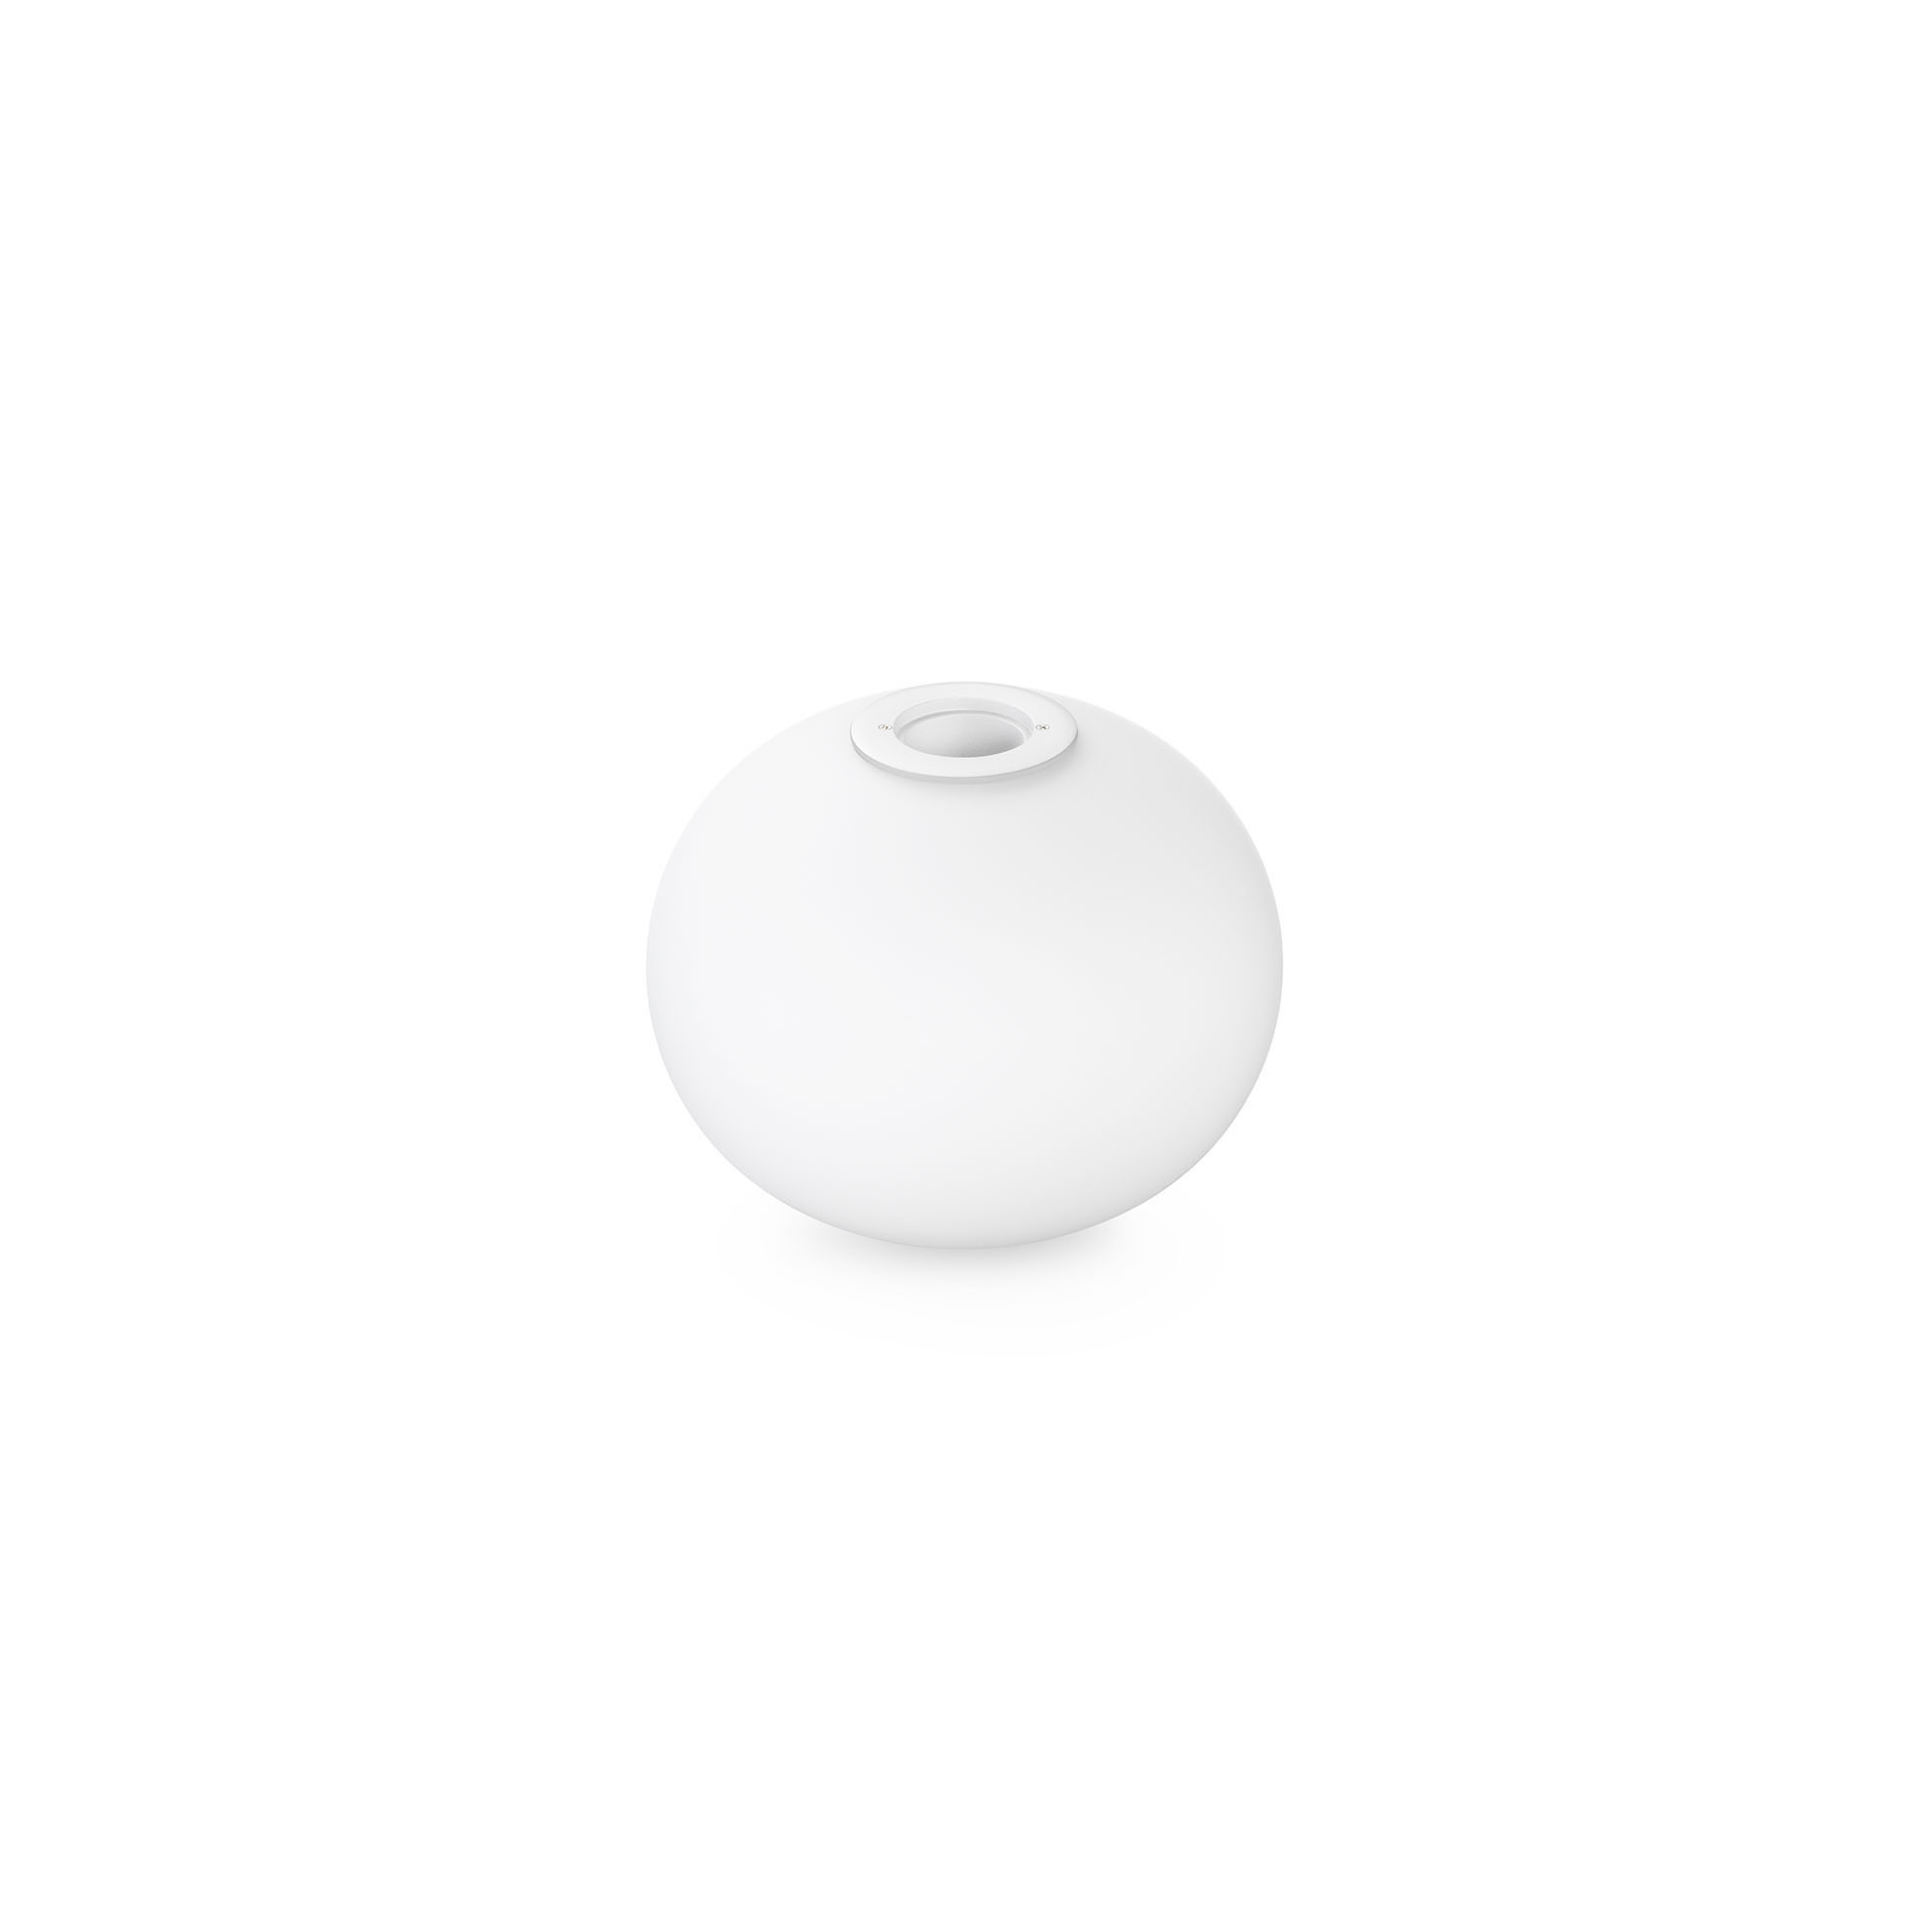 Glo-Ball Ceiling/Wall/Basic Zero diffuser assembly RF3335100 | Flos